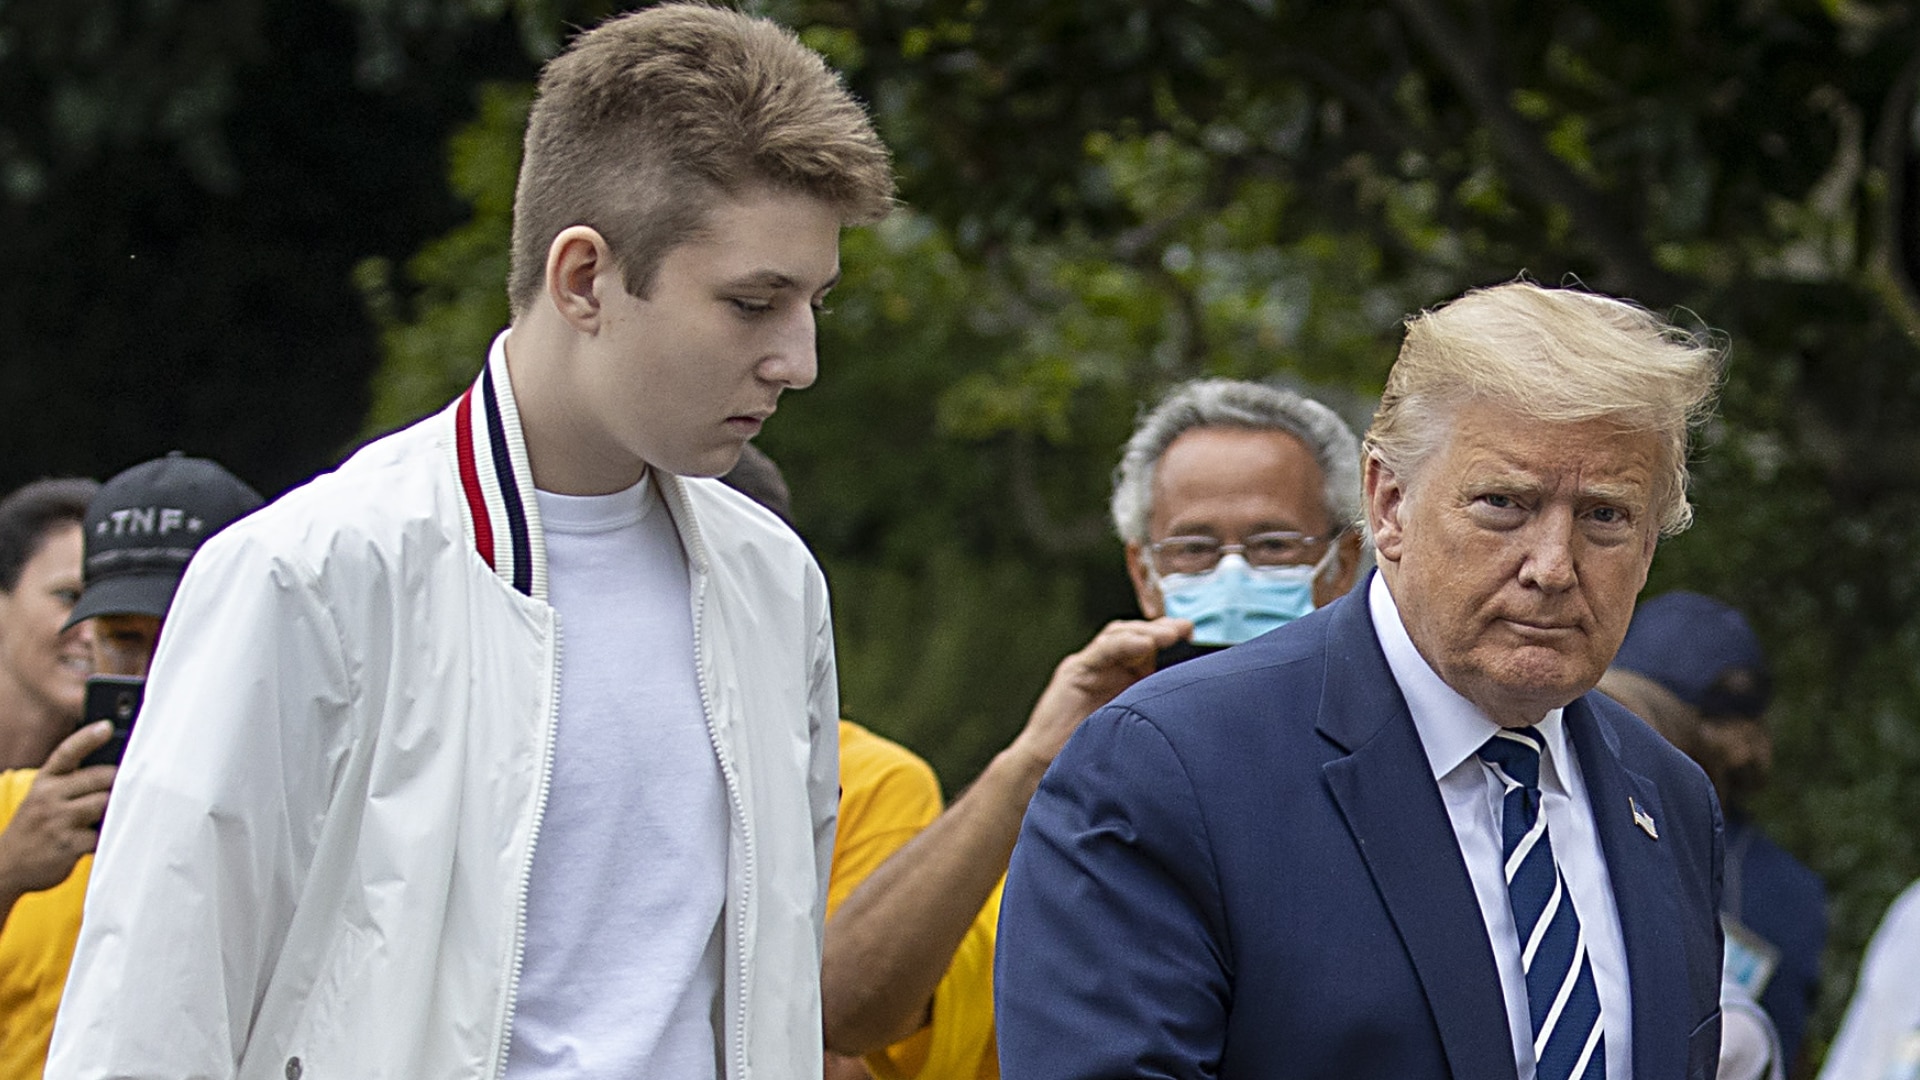 Watch Access Hollywood Interview Barron Trump Looks Grown Up Towering